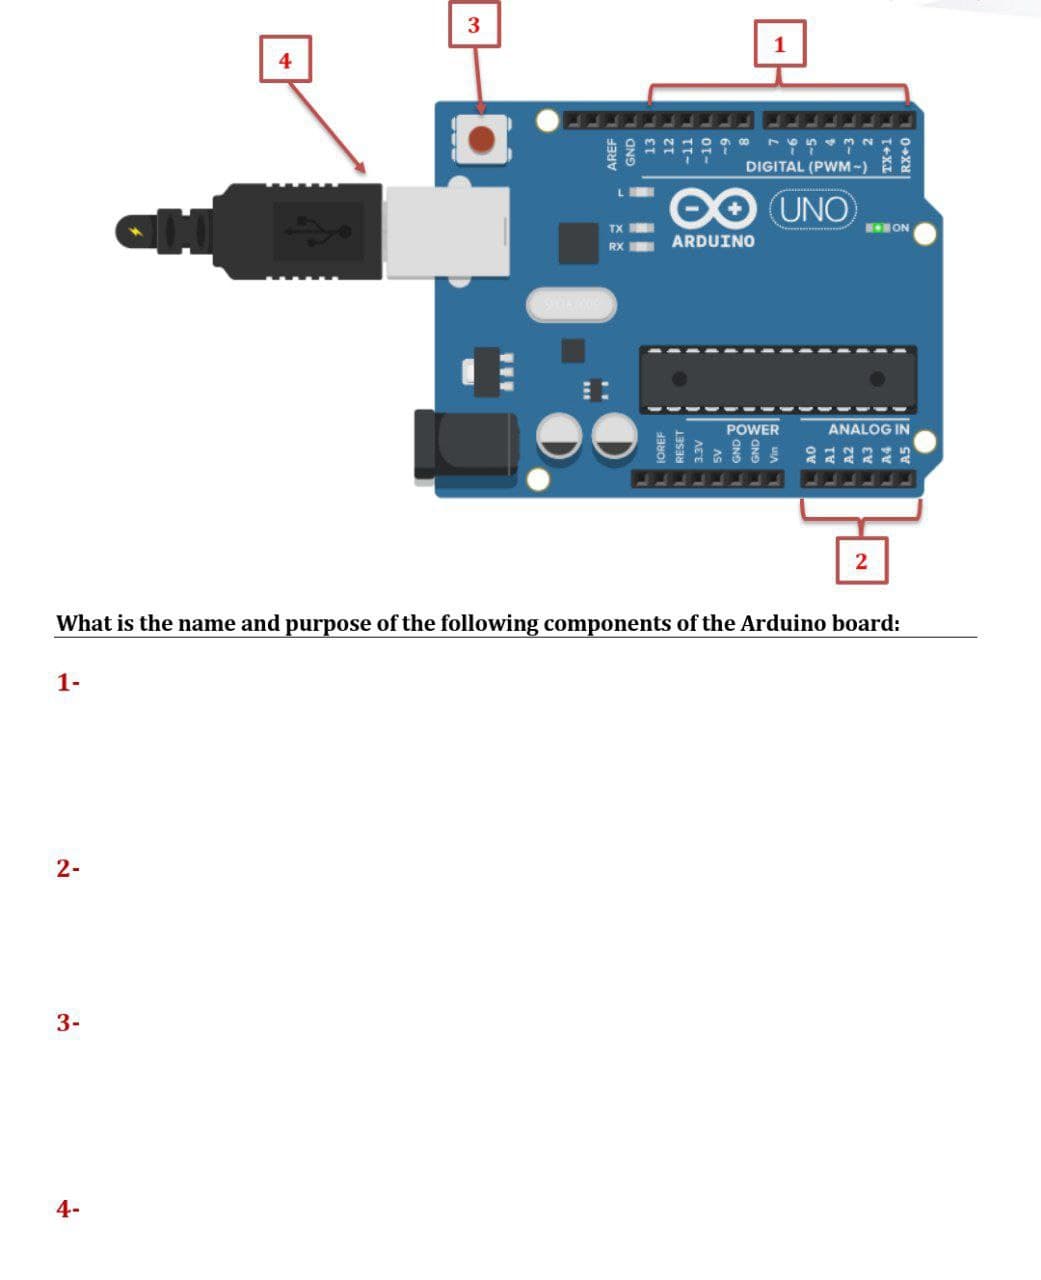 1
4
DIGITAL (PWM -) A
OO UNO
TX
H ON
ARDUINO
RX
POWER
ANALOG IN
What is the name and purpose of the following components of the Arduino board:
1-
2-
3-
4-
0+x|
